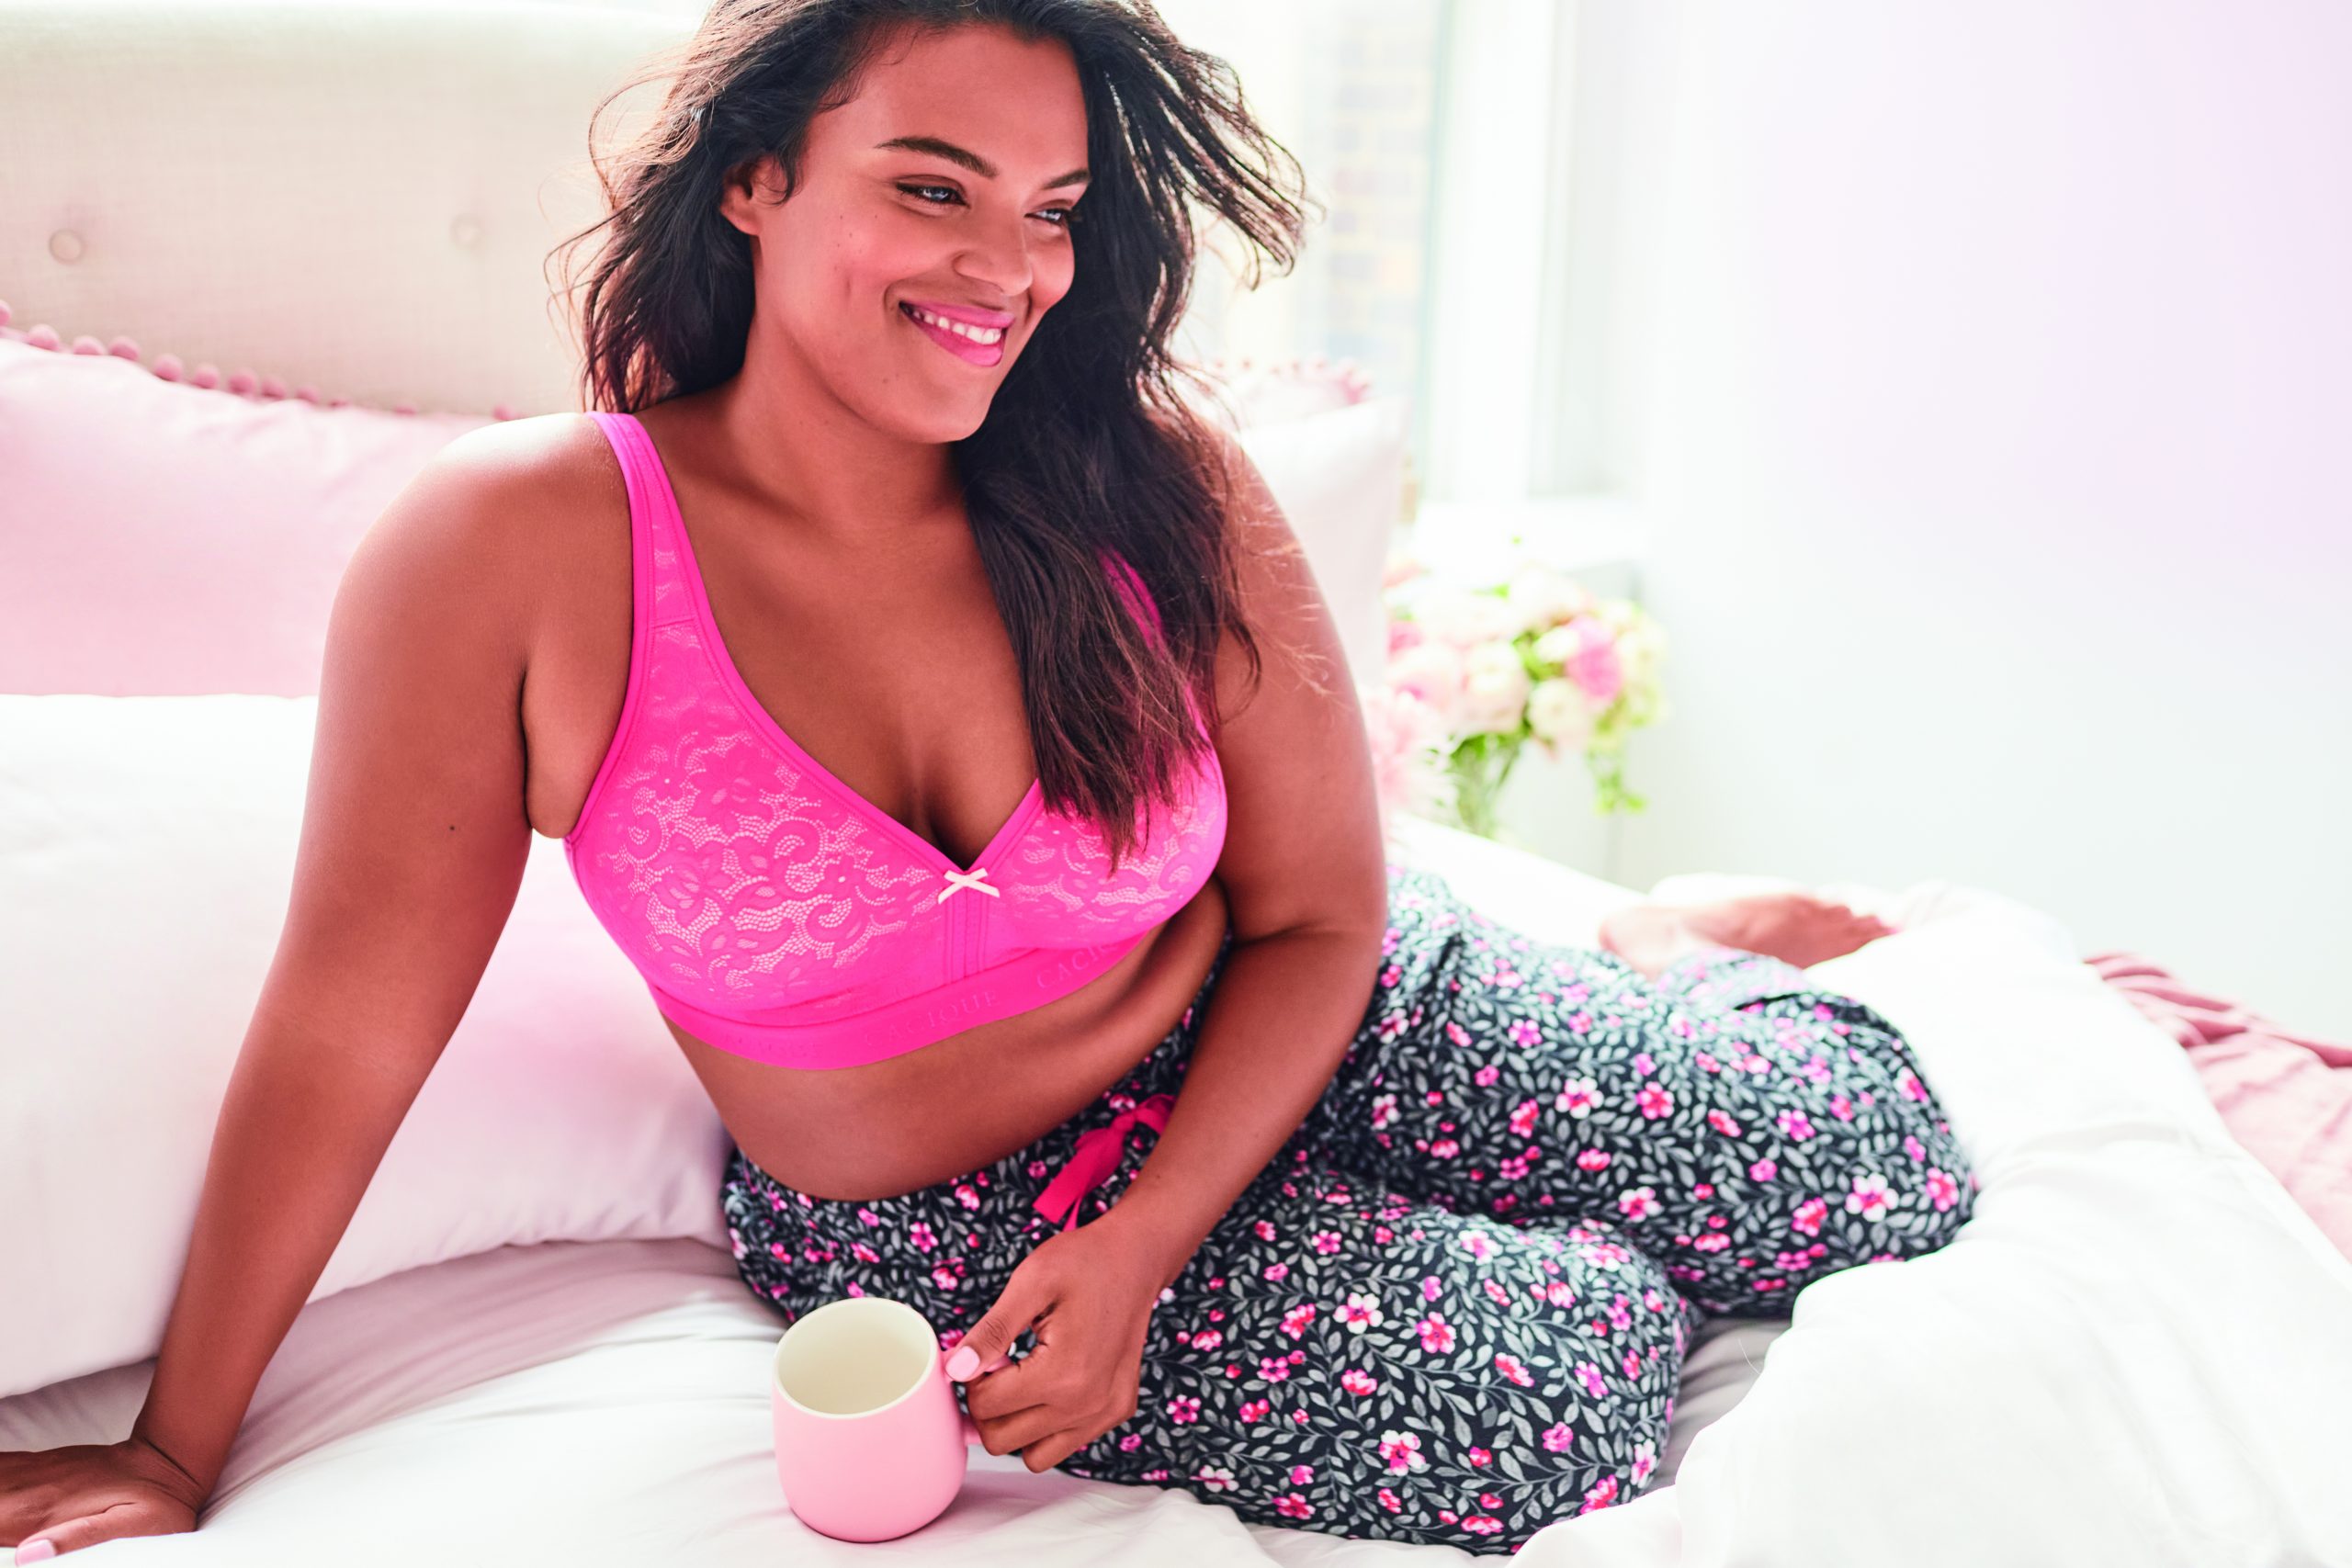 Image of A MODEL WEARS LACE UNDERWEAR AT THE LANE BRYANT FASHION